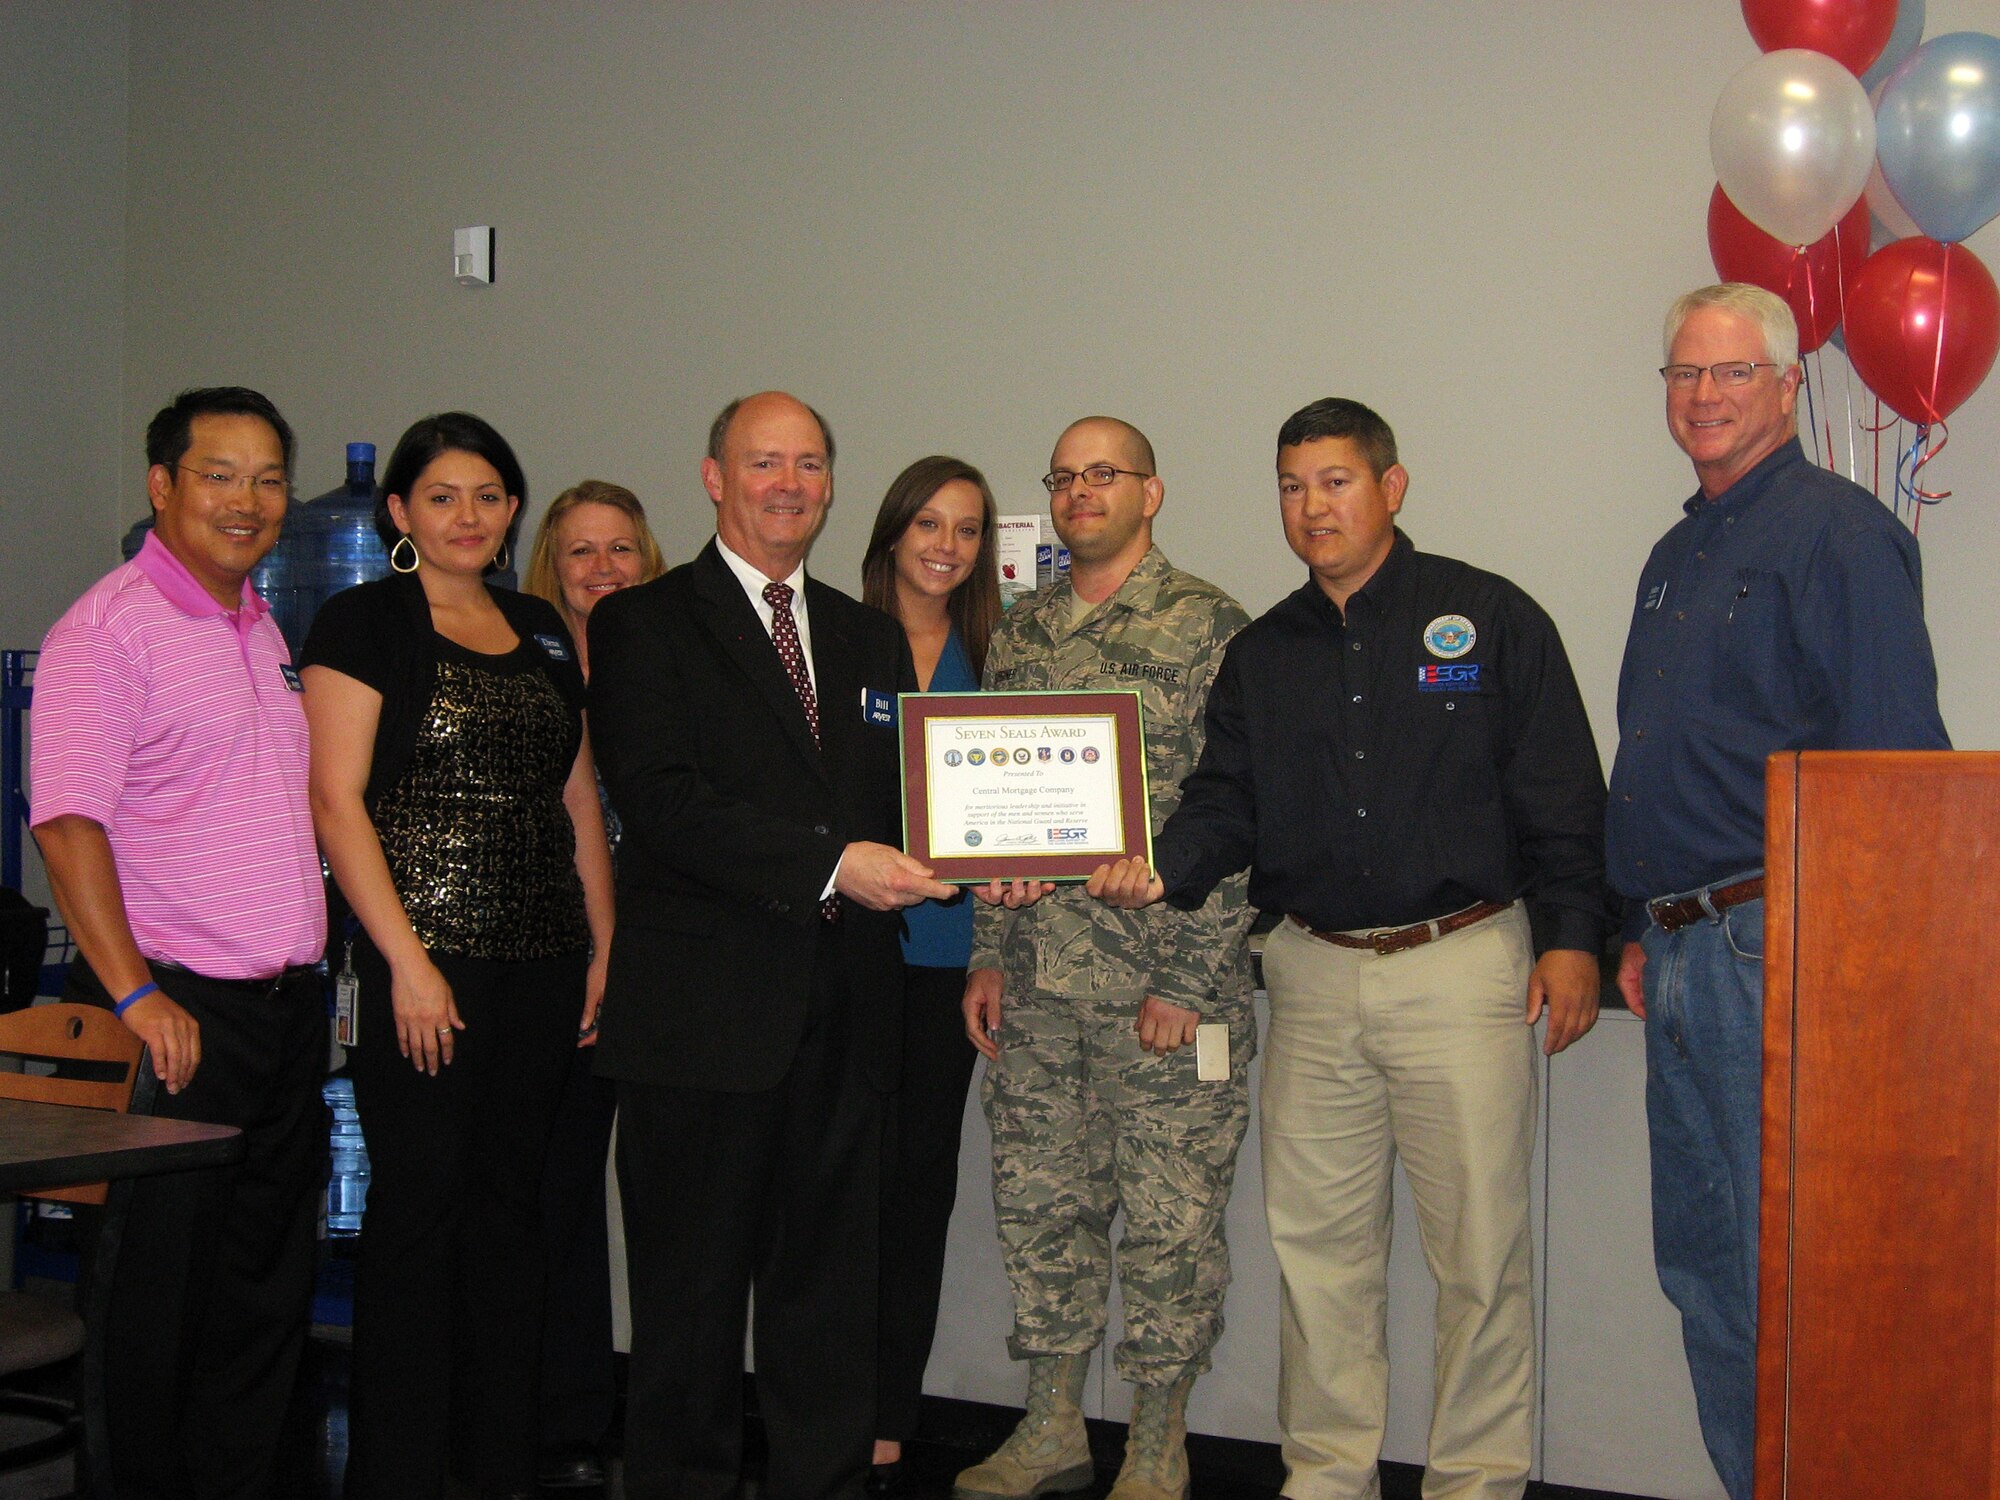 From left: Steven Plaisance, Arvest Mortgage president; Elena Oseguera, Arvest employee; Judi Acord, Arvest employee; Bill Roehrenbeck, Arvest Mortgage chairman; Alex Henry, Arvest employee; Master Sgt. Jon Surginer of the 188th Aircraft Maintenance Squadron; Master Sgt. Brian Anible, 188th Mission Support Group 1st Sgt and Arkansas Committee for Employer Support of the Guard and Reserve volunteer; John Womack, Arvest Bank president (Little Rock). Arvest Mortgage was presented a Patriot Award for being highly supportive of Surginer’s career in the 188th Fighter Wing. The Seven Seals Award is the broadest and most inclusive award given by ESGR, as it may be awarded to employers, ESGR staff members and volunteers, or any person or entity that significantly advances the ESGR mission.  It is presented at both the state and national levels to honor significant individual or organizational achievement, initiative, or support that promotes and supports the ESGR mission, to include the efforts of the more than 4,900 volunteers who carry out ESGR’s mission across the Nation on a daily basis. To nominate your employer for an award, go to http://www.esgr.mil/Employer-Awards/ESGR-Awards-Programs.aspx. (courtesy photo)